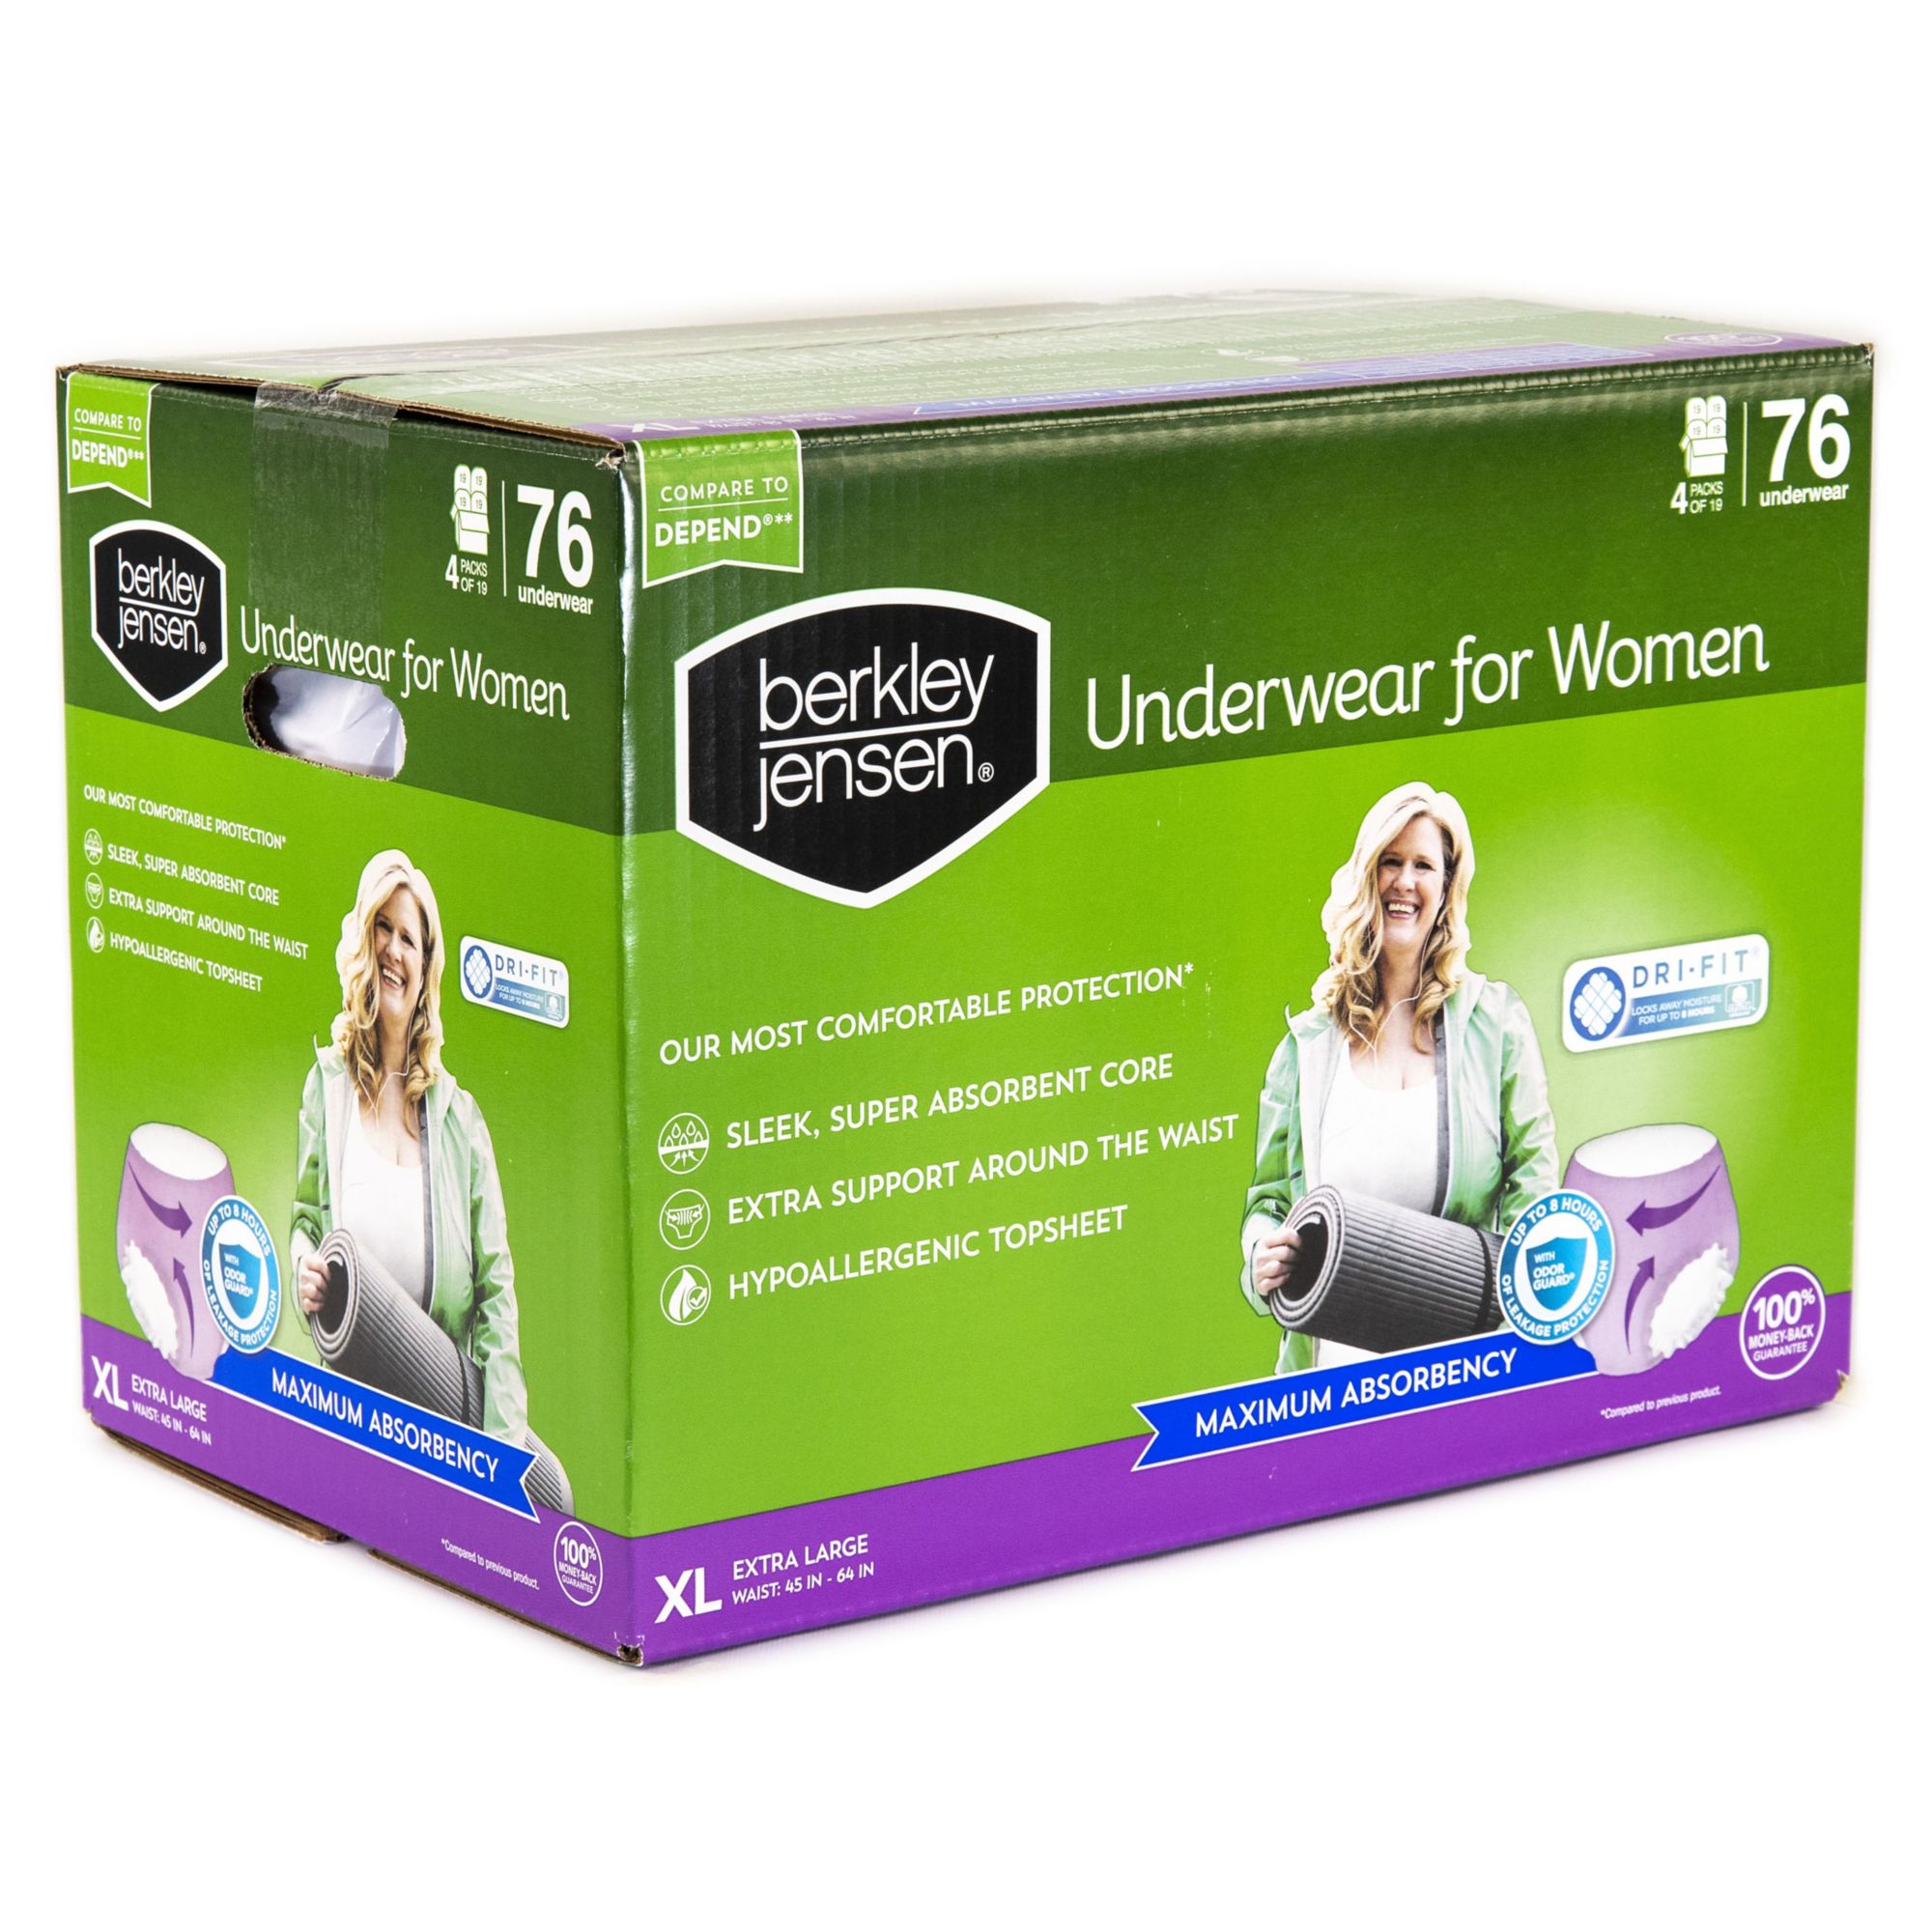 Fresh Protection Women Incontinence Underwear Maximum Absorbency, Blush -  Small, 19 units – Depend : Incontinence